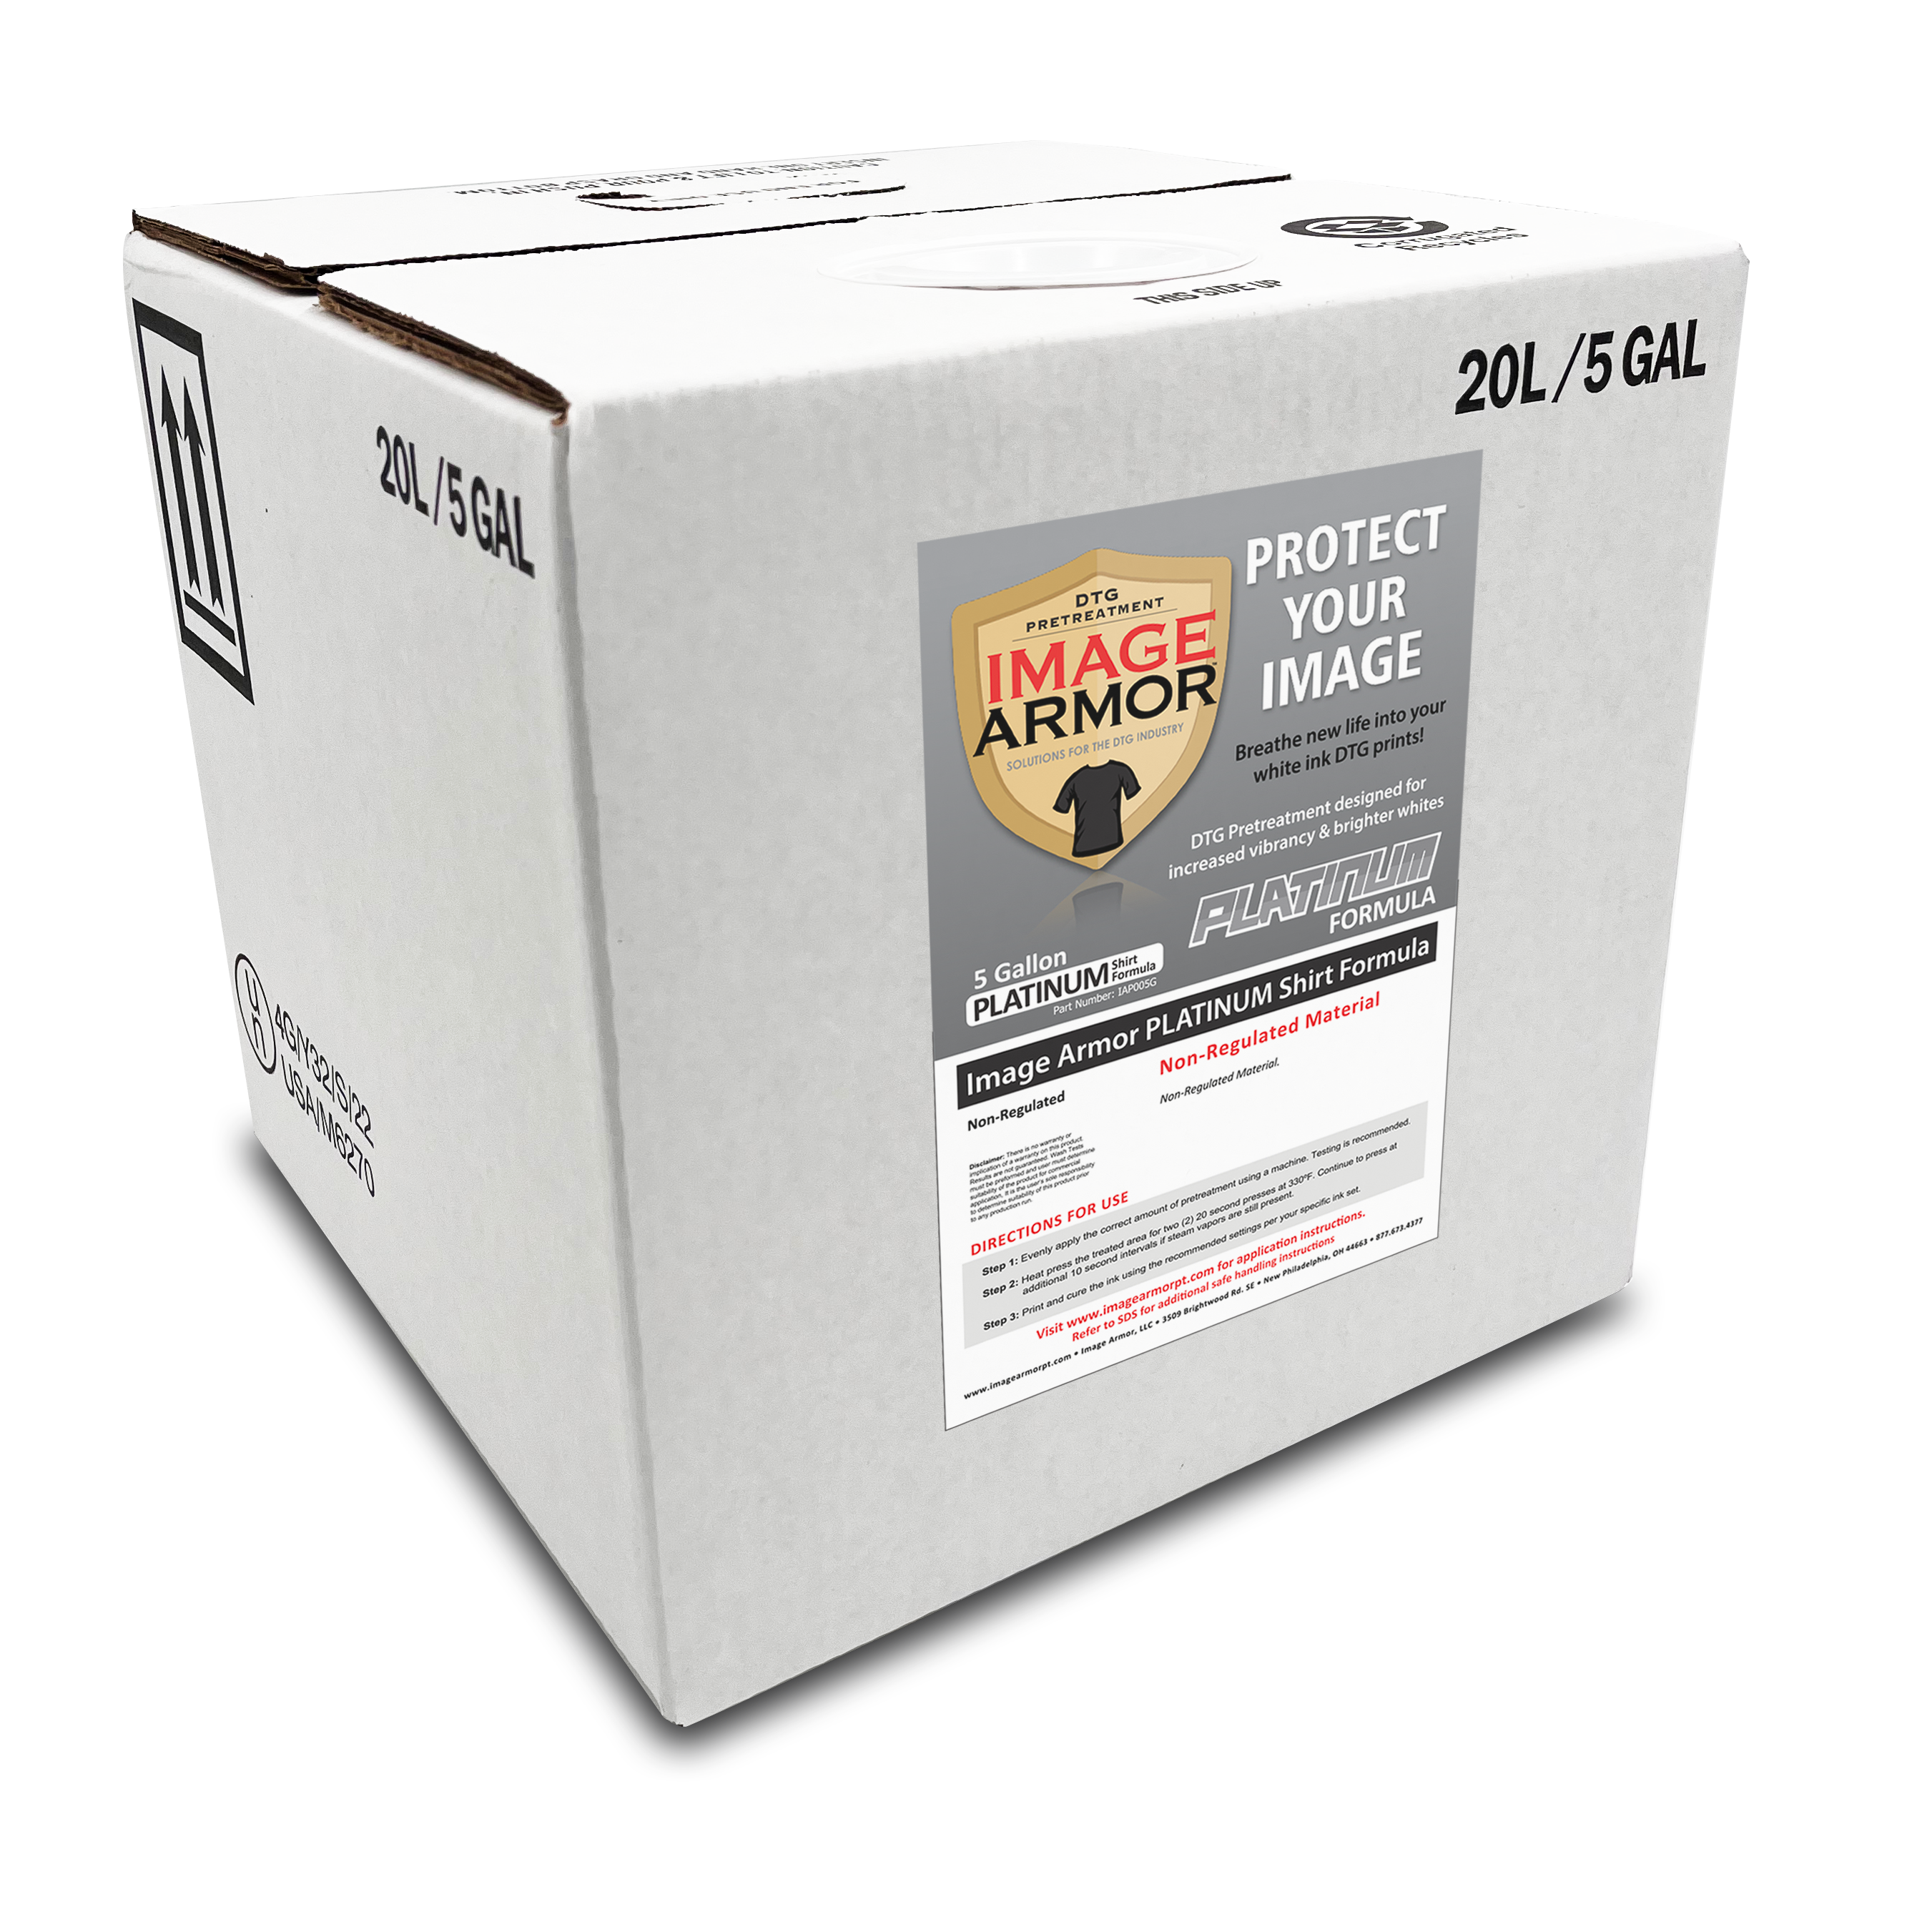 Image Armor Platinum pretreatment 5 gallons for dtg printing